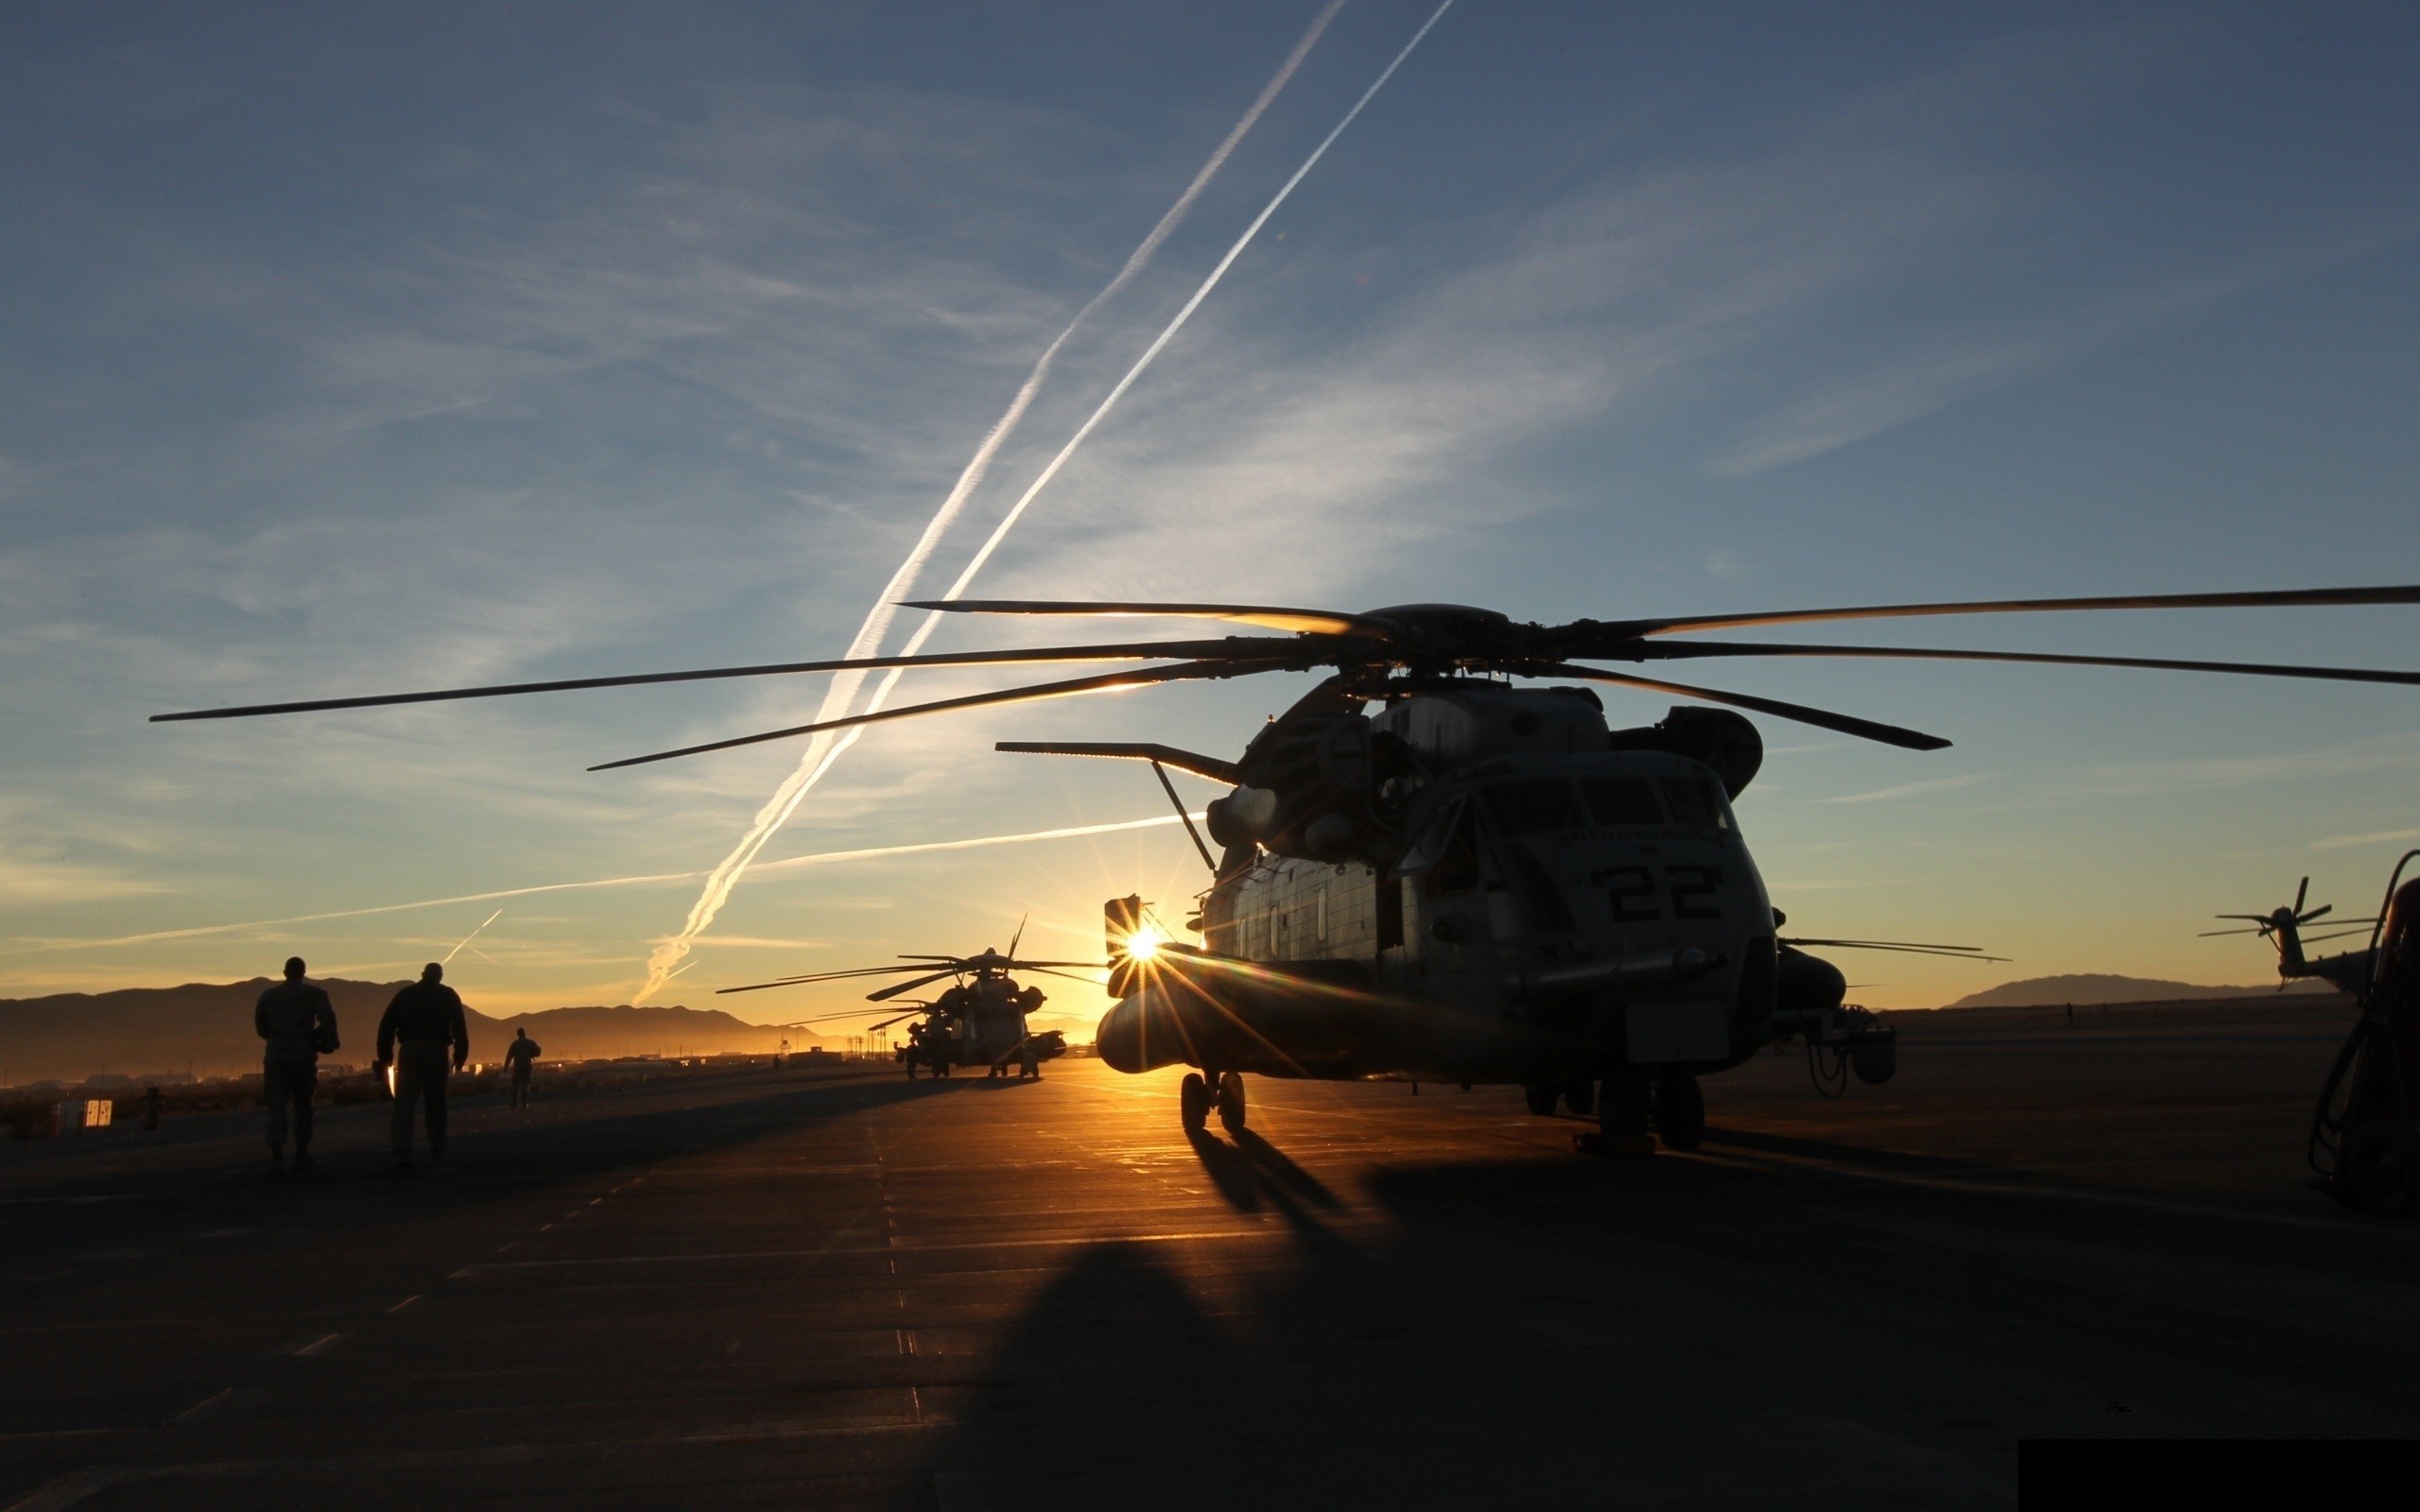 helicopters, Aircraft, Sunset, MH 53 Pave Low Wallpaper